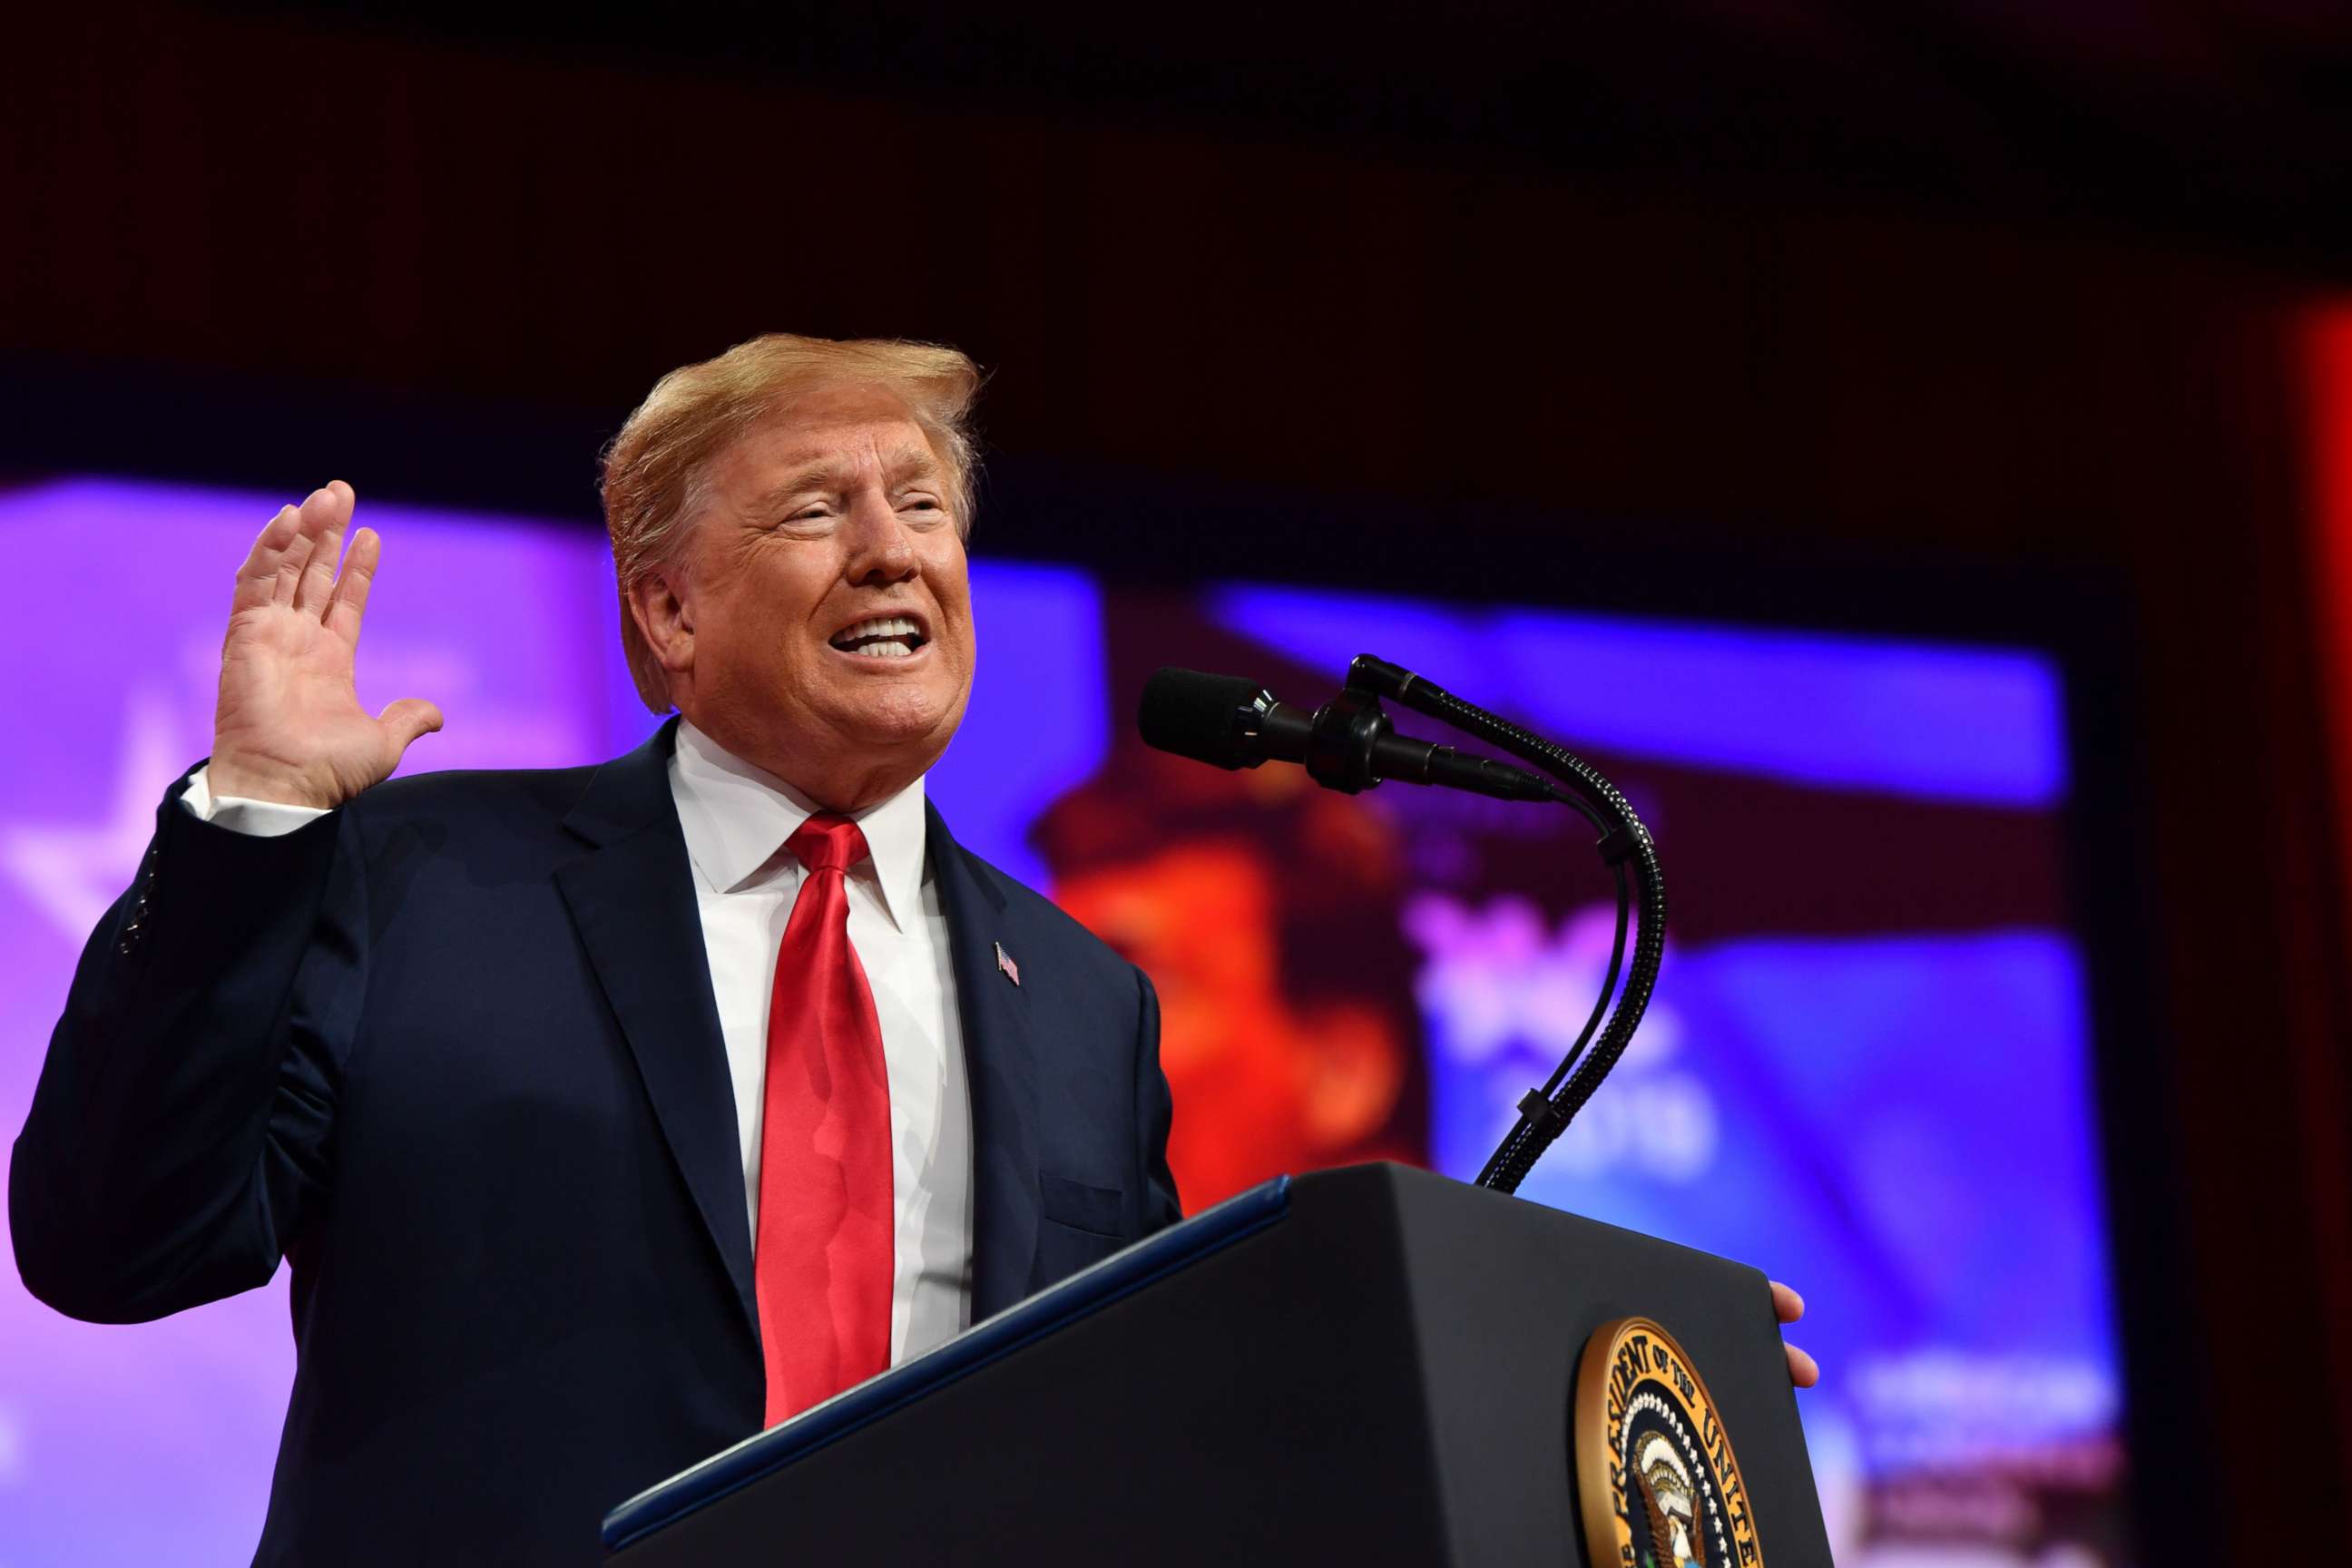 PHOTO: President Donald Trump speaks during the annual Conservative Political Action Conference (CPAC) in National Harbor, Md., March 2, 2019.